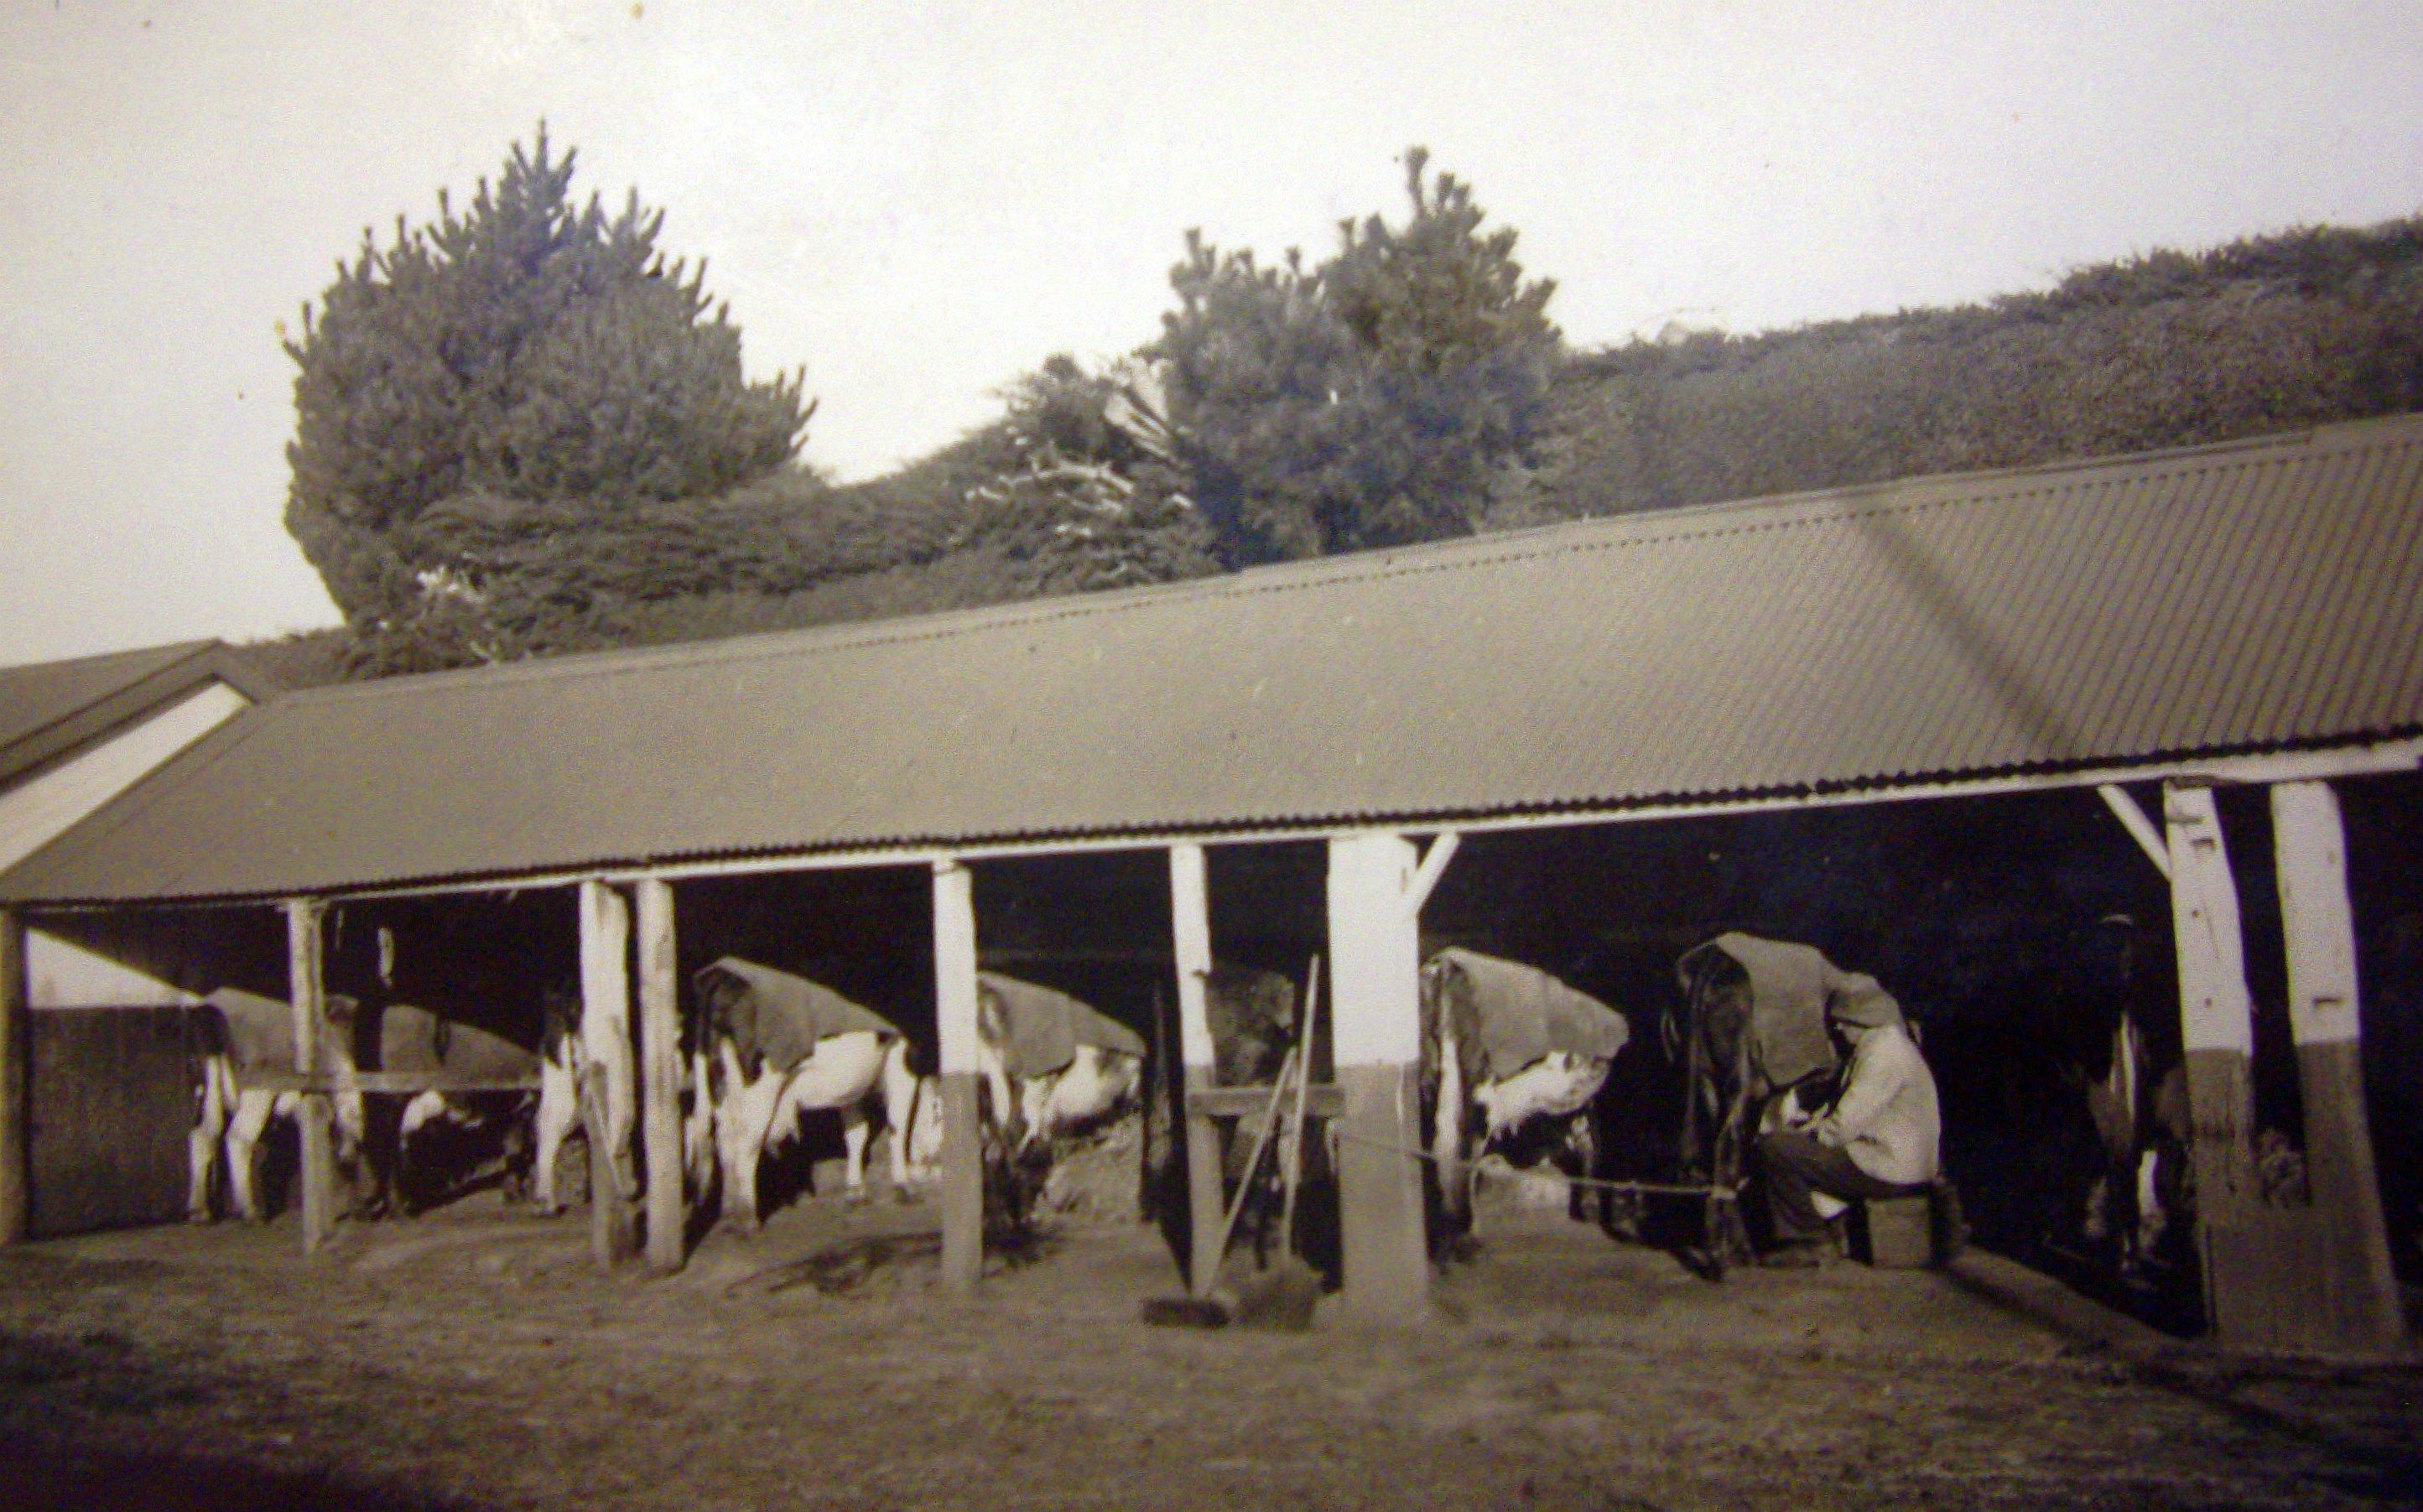 View of an open 
cowshed with someone milking a cow.